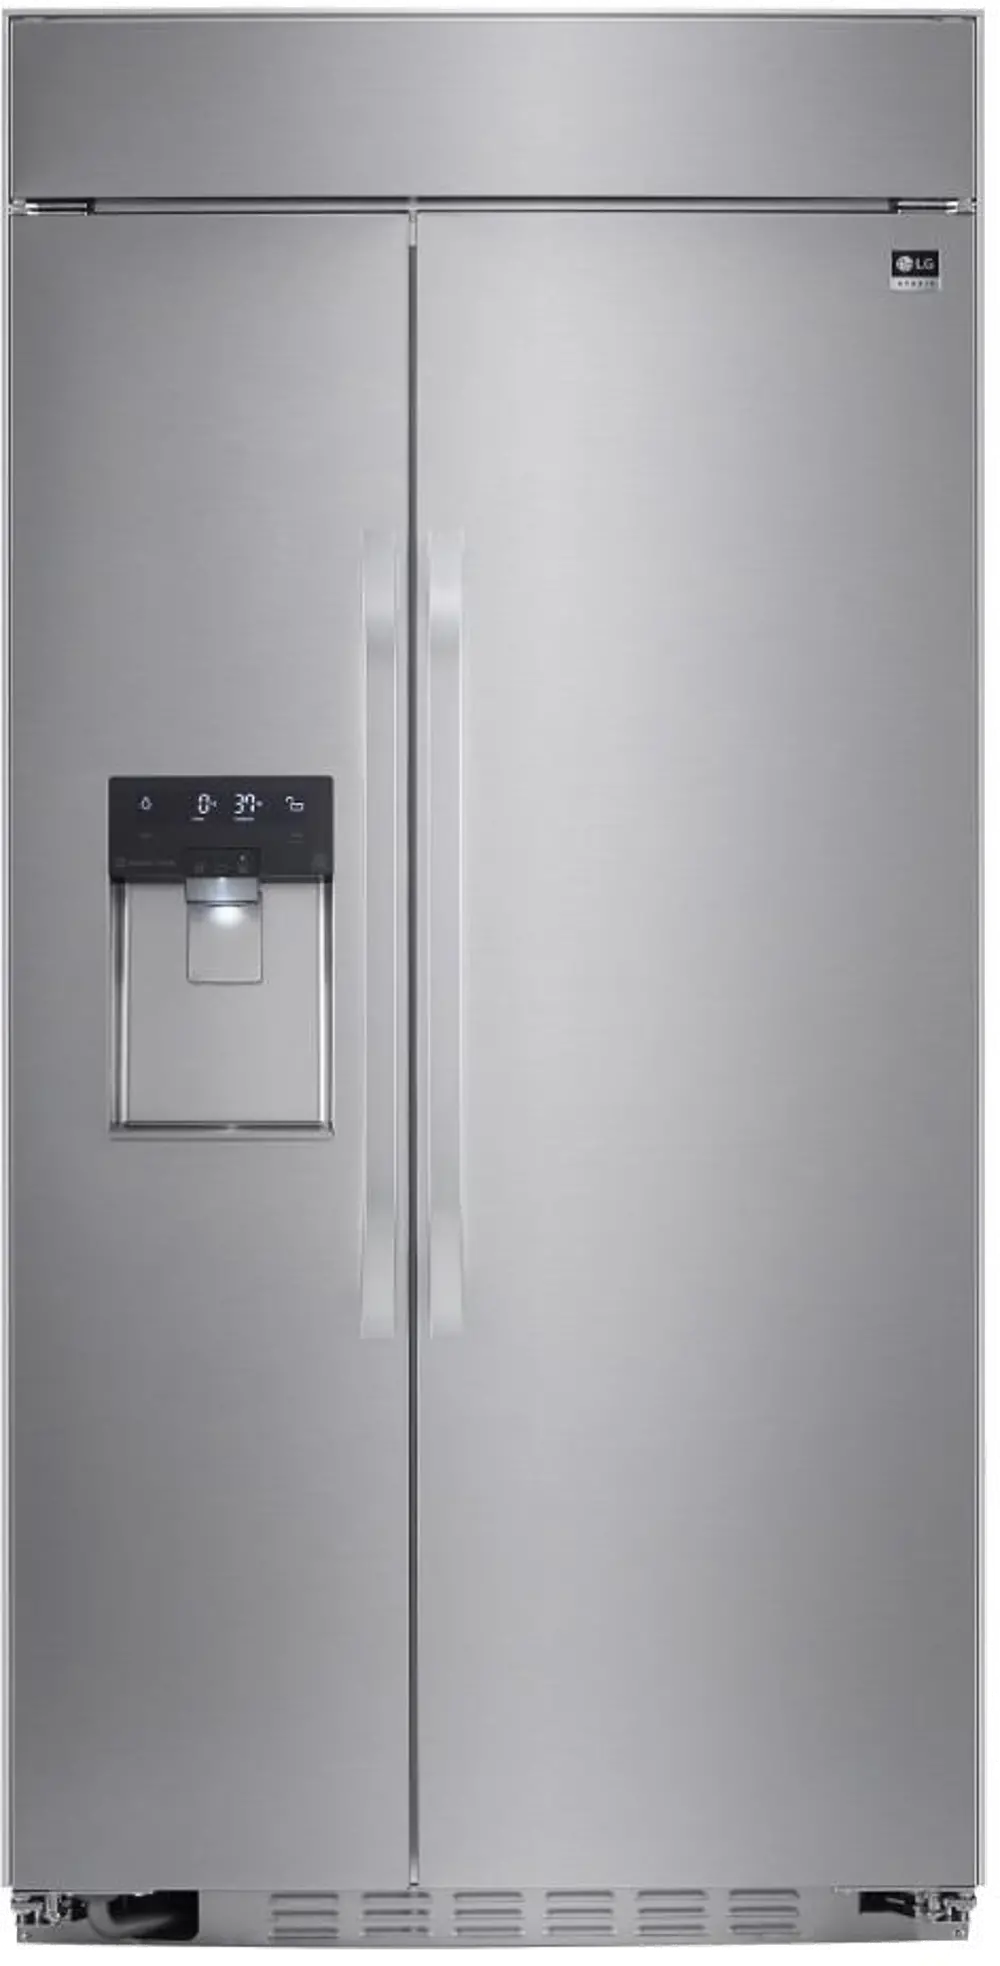 LSSB2692ST LG Studio Built In Side by Side Smart Refrigerator - 25.6 cu. ft., 42 Inch Stainless Steel-1